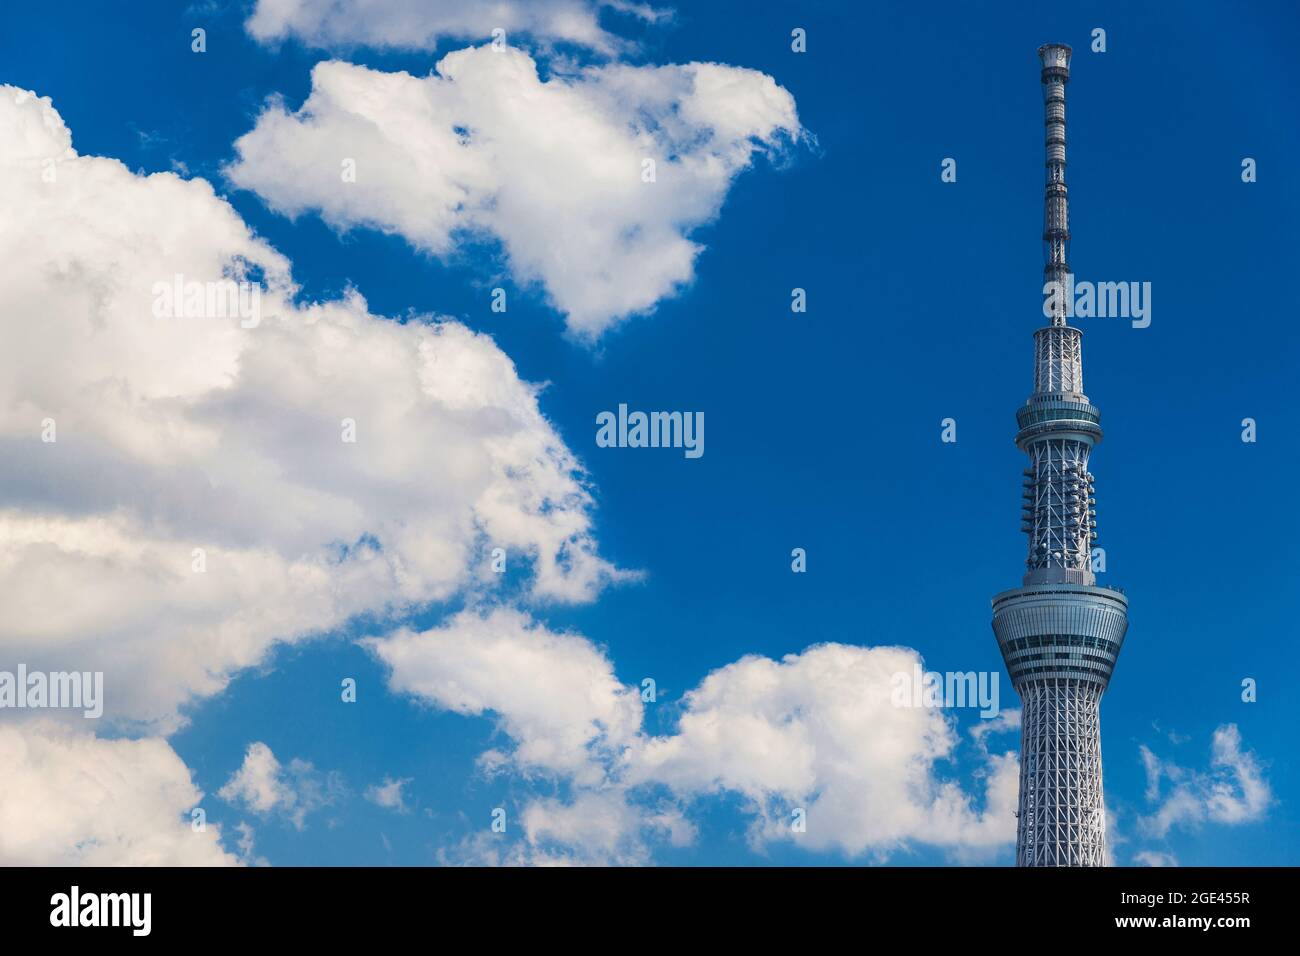 The iconic Tokyo Skytree Tower, the tallest structure in Japan, among clouds Stock Photo